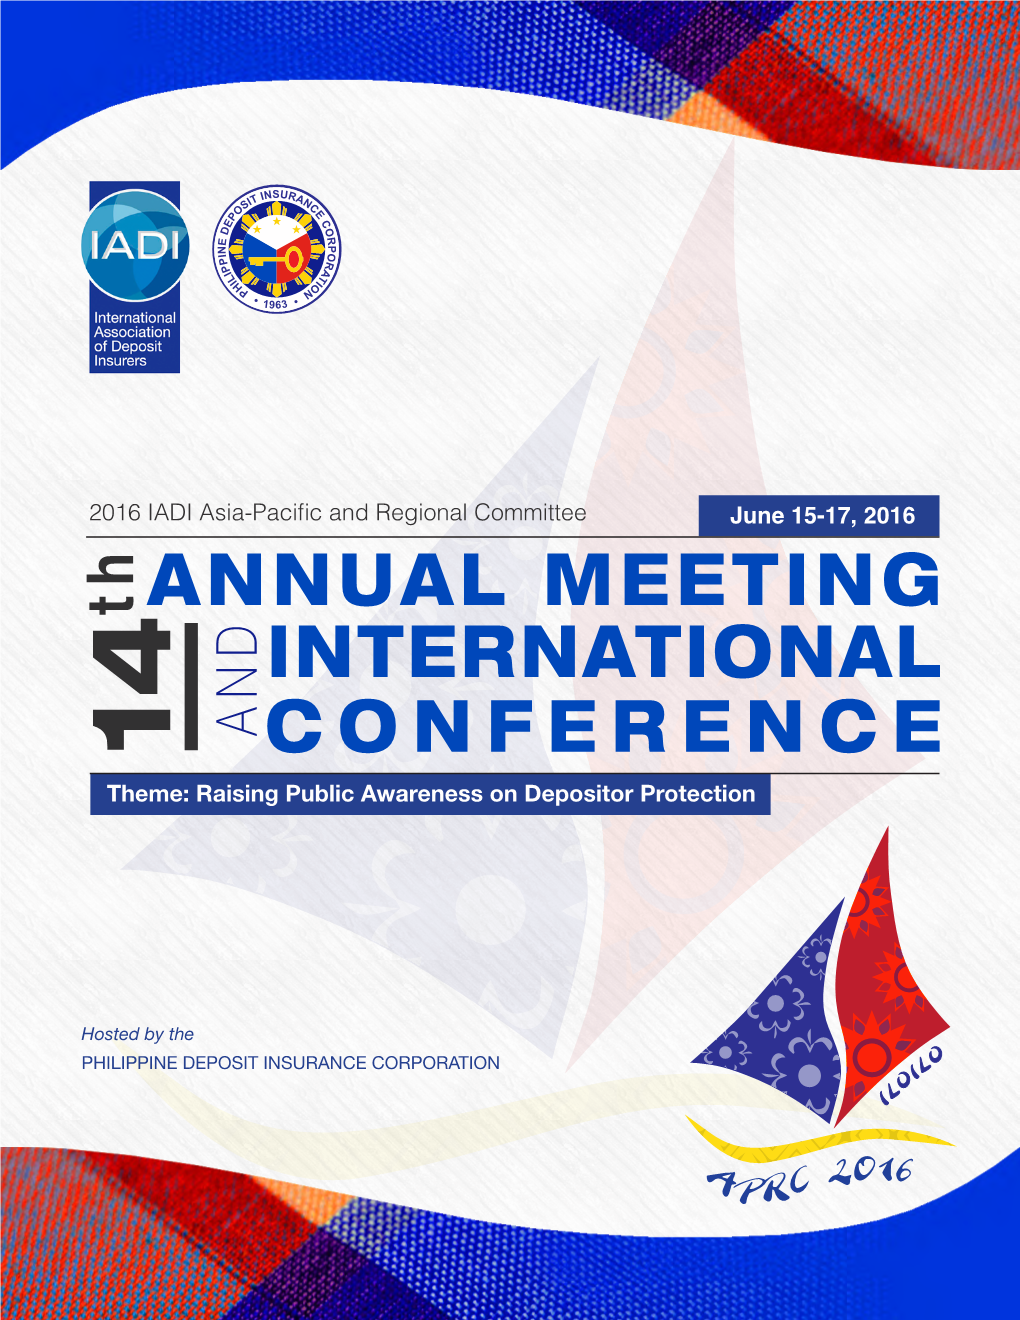 Conference Annual Meeting International